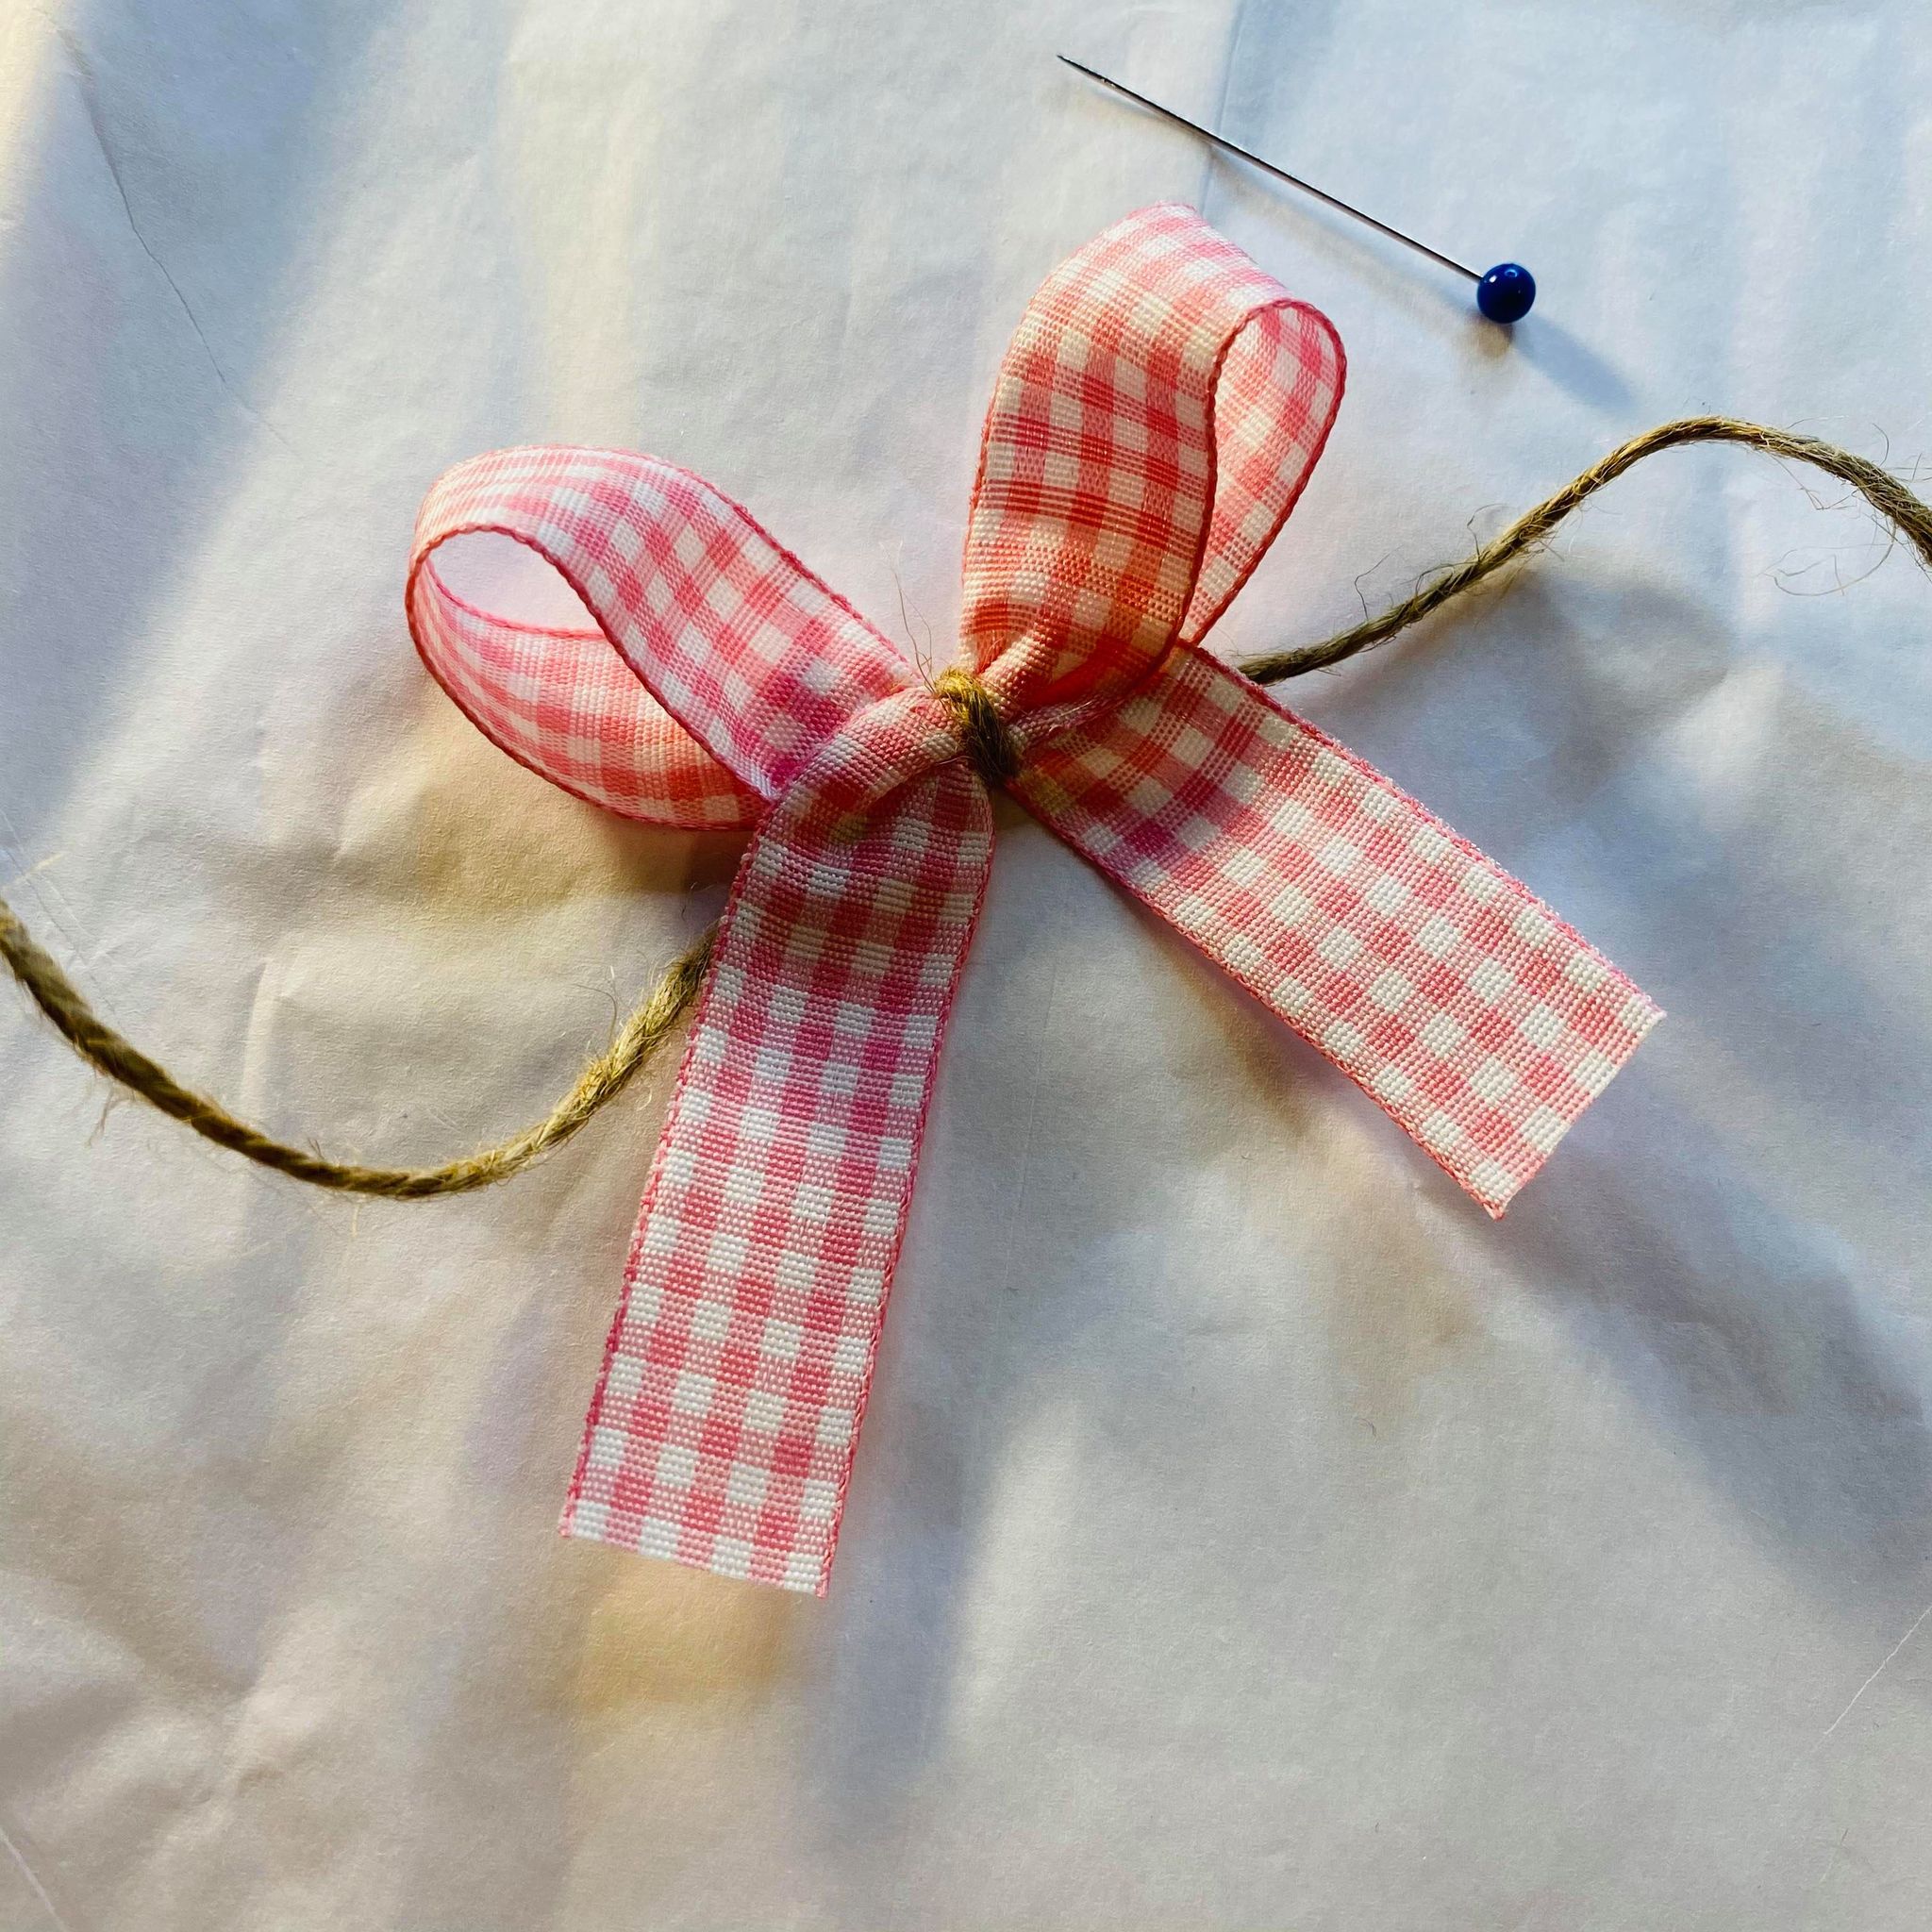 A Simple Way to Make a Bow - Awareness Ribbon Method - My Eclectic